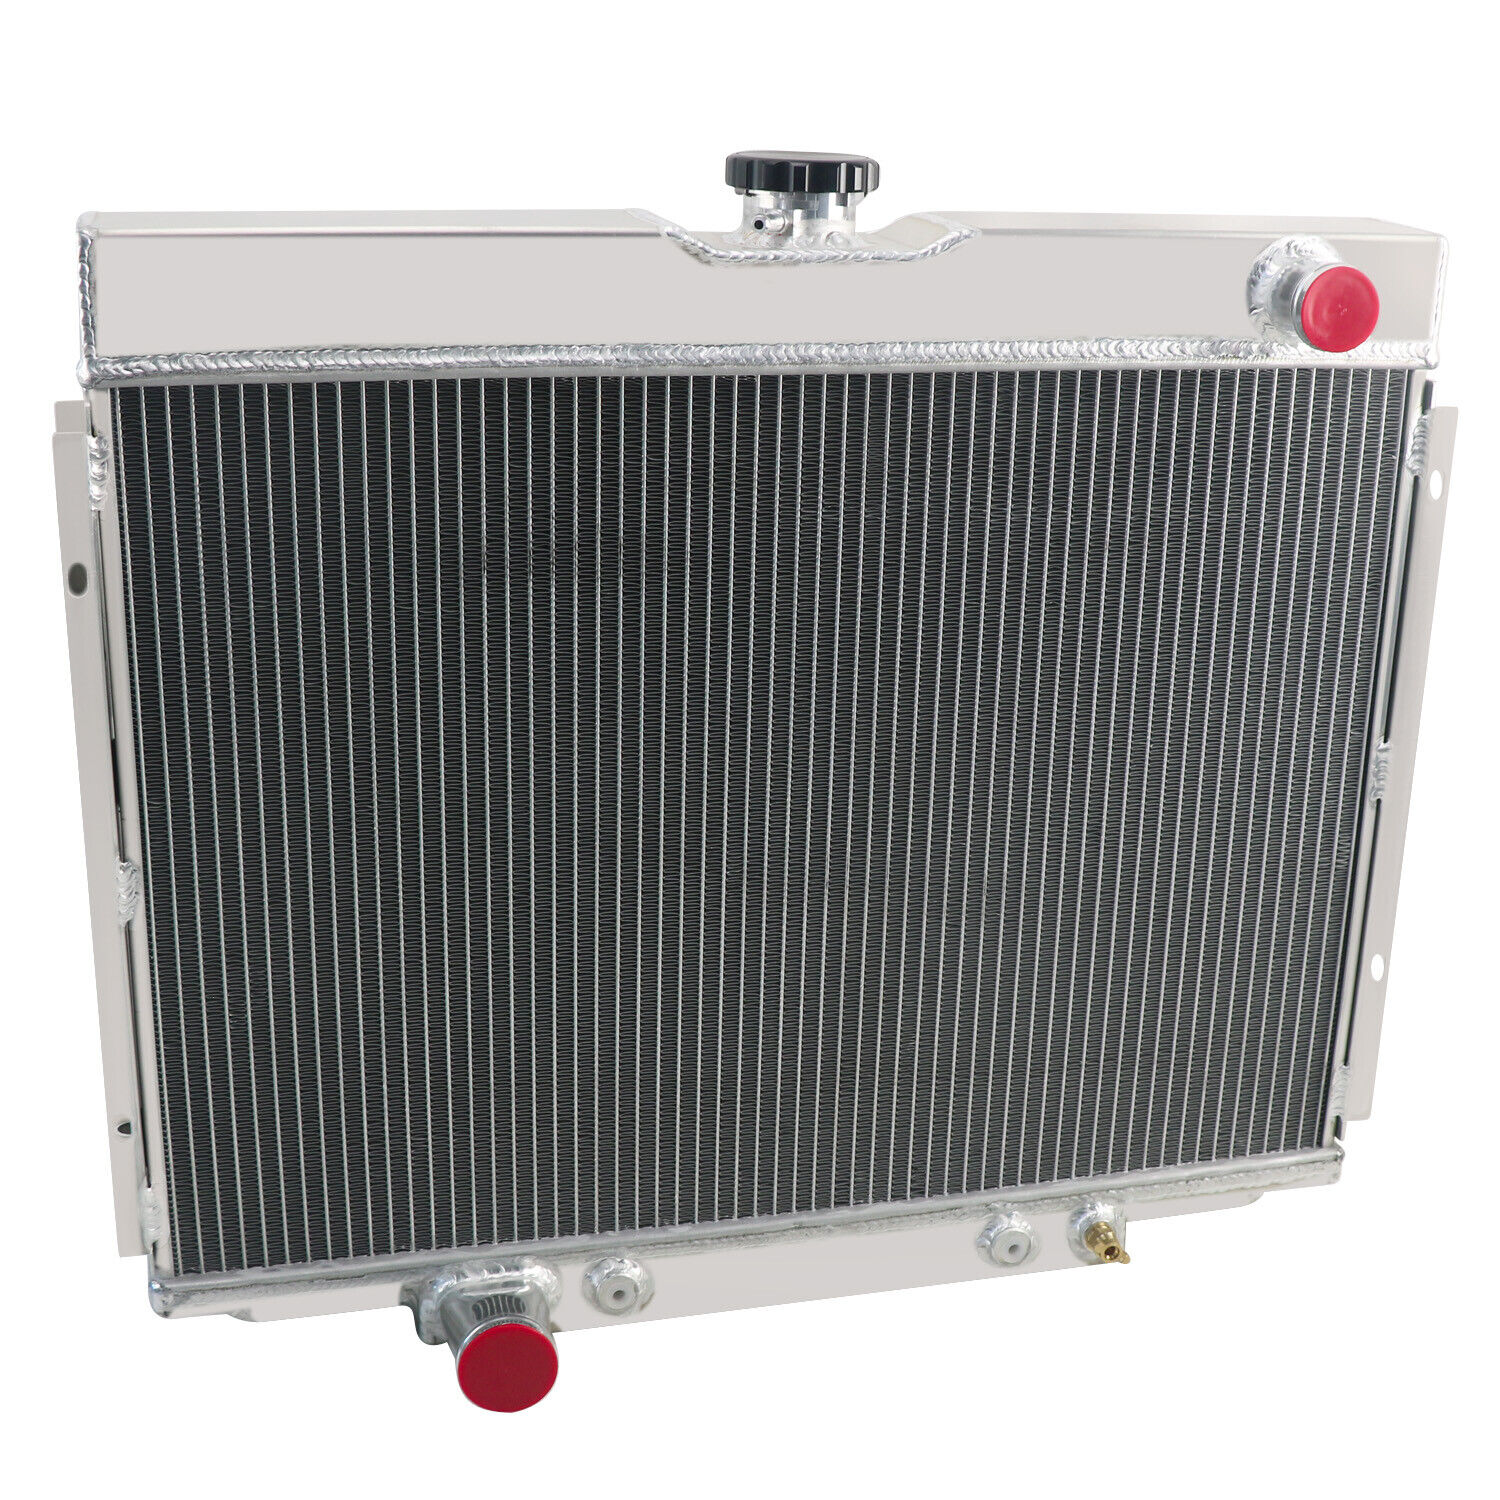 3 Rows Radiator for 1967-70 Ford Mustang/Cougar/Fairlane/Falcon/LTD